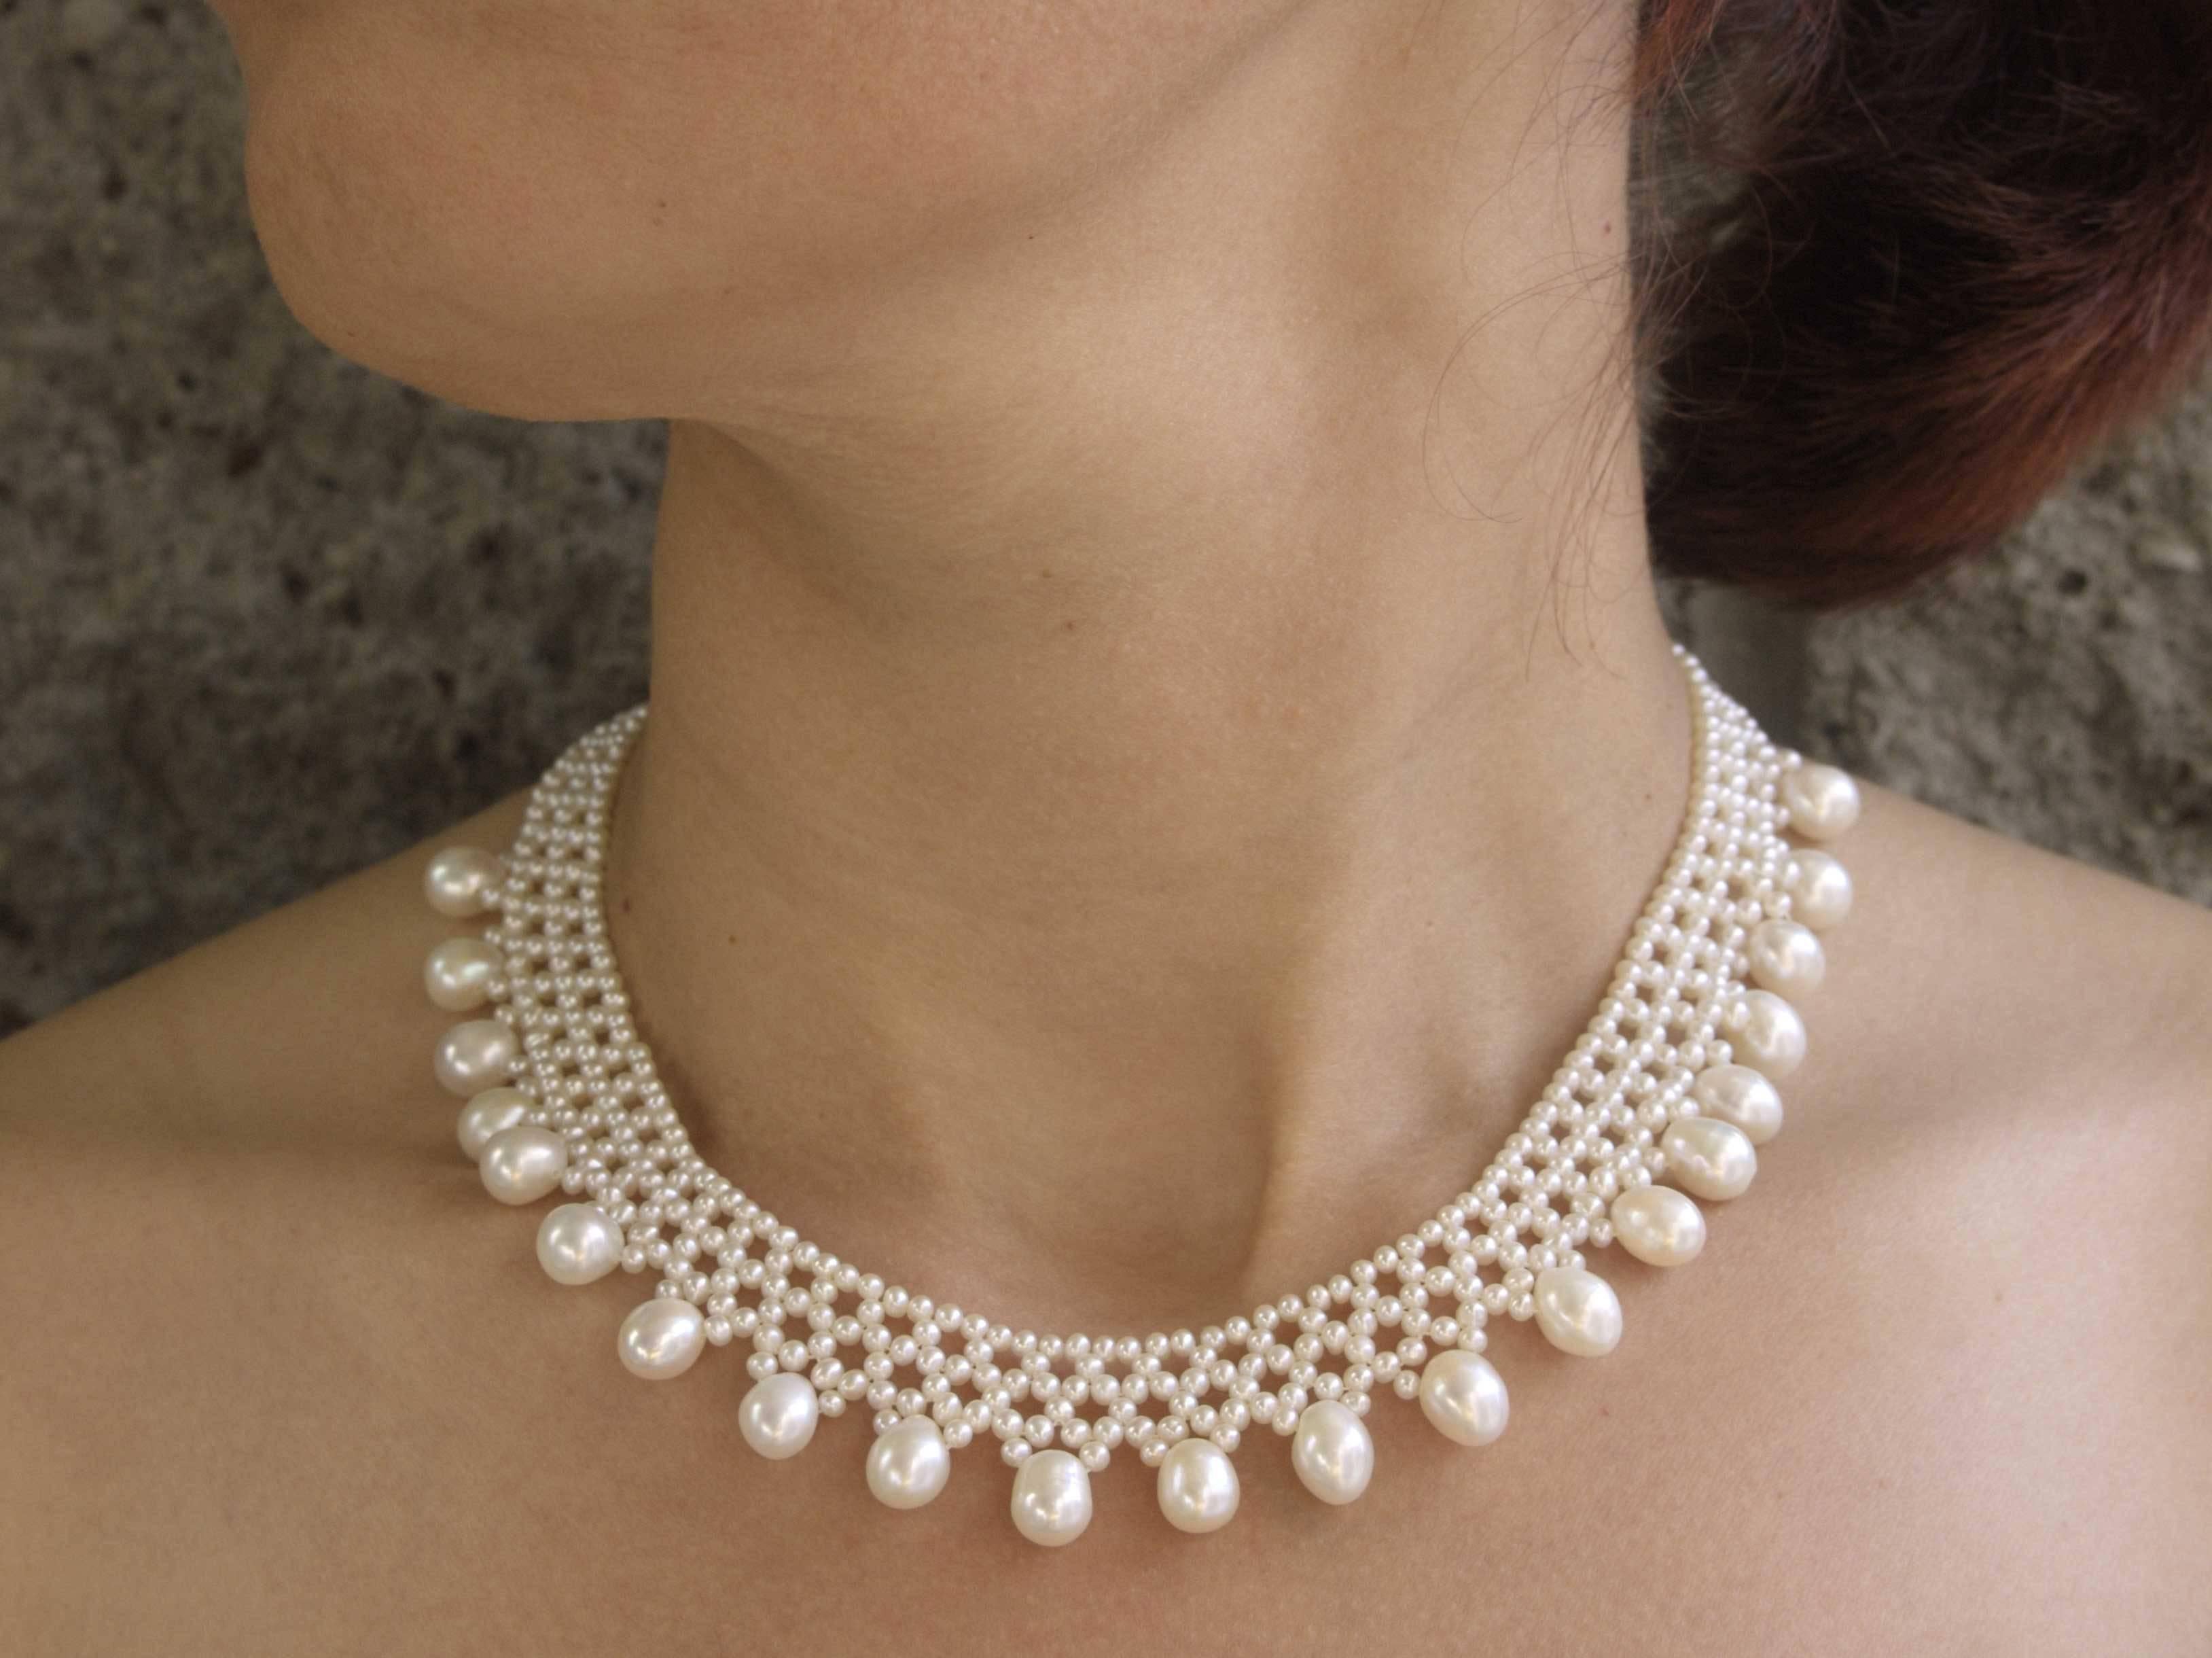 This hand woven necklace is made using 2.5-3 mm pearls to create a lace-like design that perfectly fits the collar.         ( 16.5 inches  long) . Necklace is tapered in design to fit along the curve of the neckline. 6.5 - 7 mm pear-shaped drops